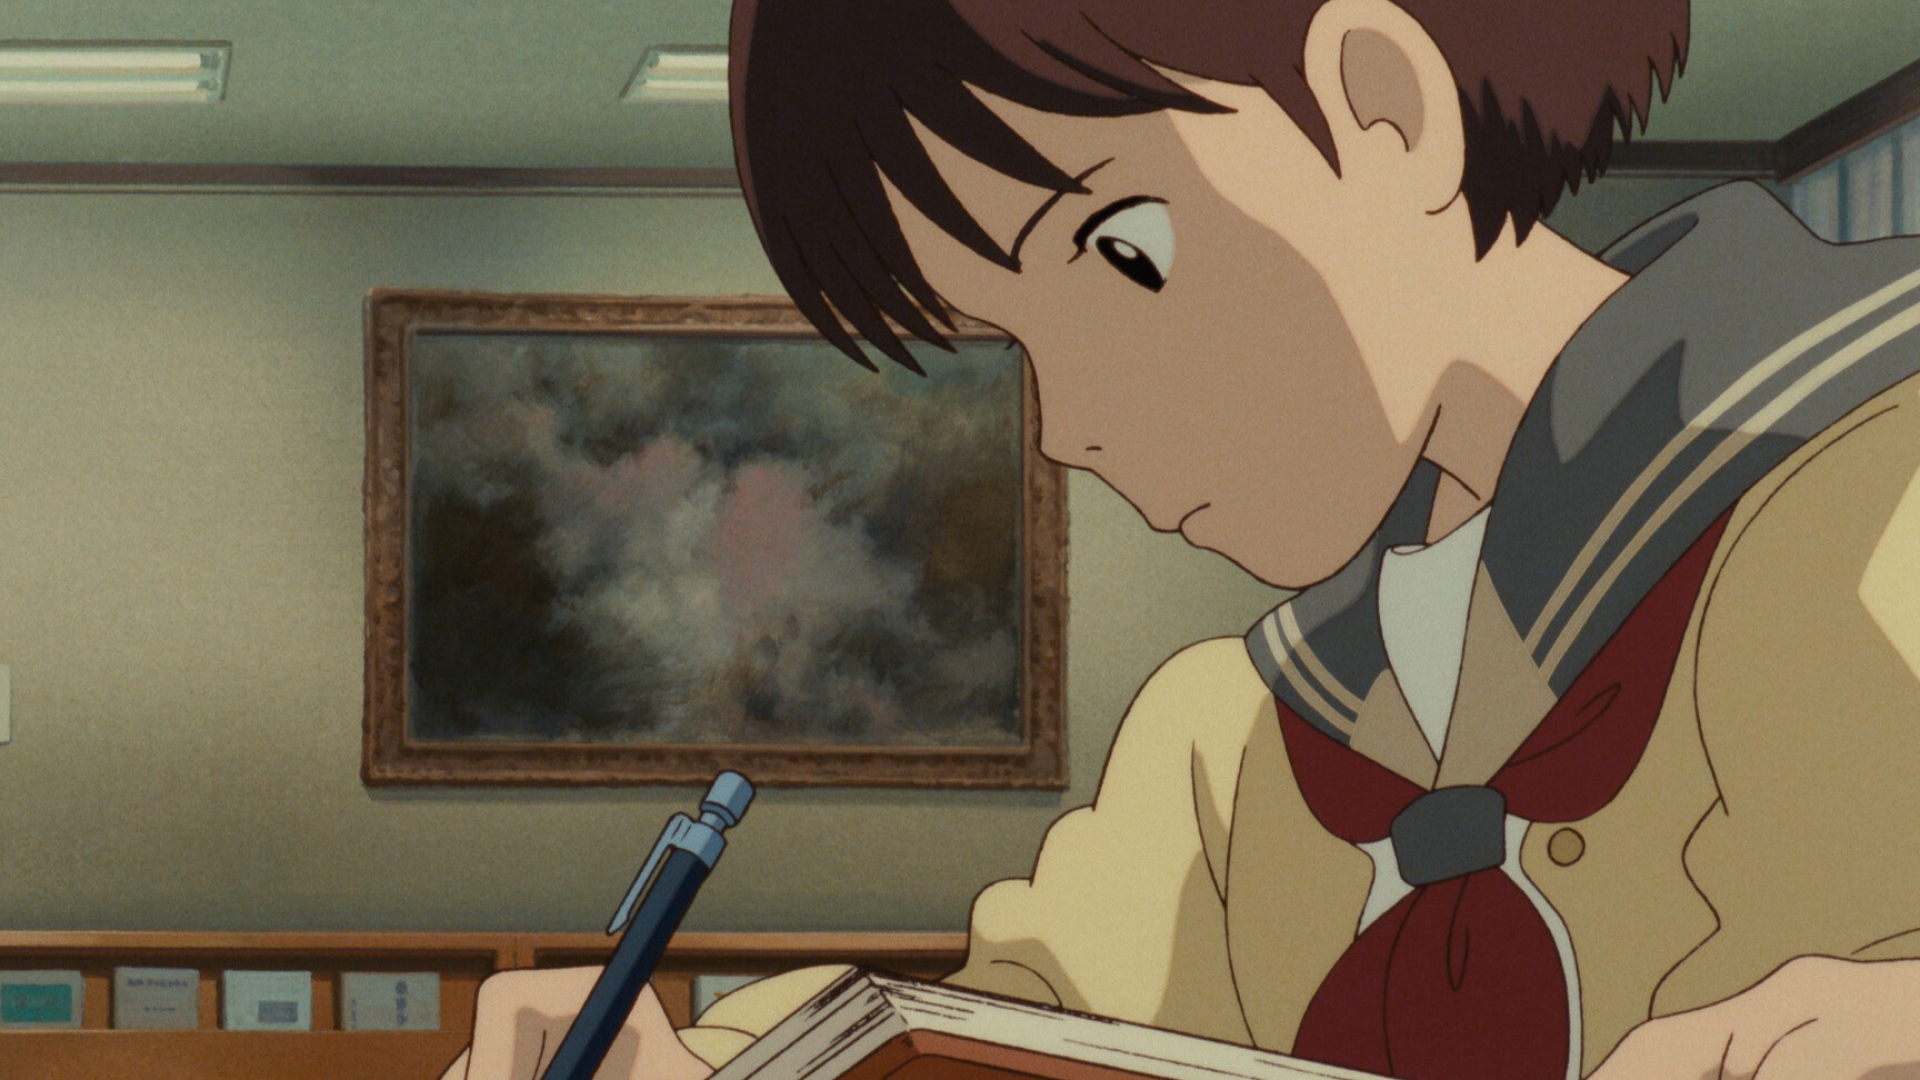 Whisper of the Heart: A junior high school girl living in Tama New Town, a Tokyo suburb. 1920x1080 Full HD Wallpaper.